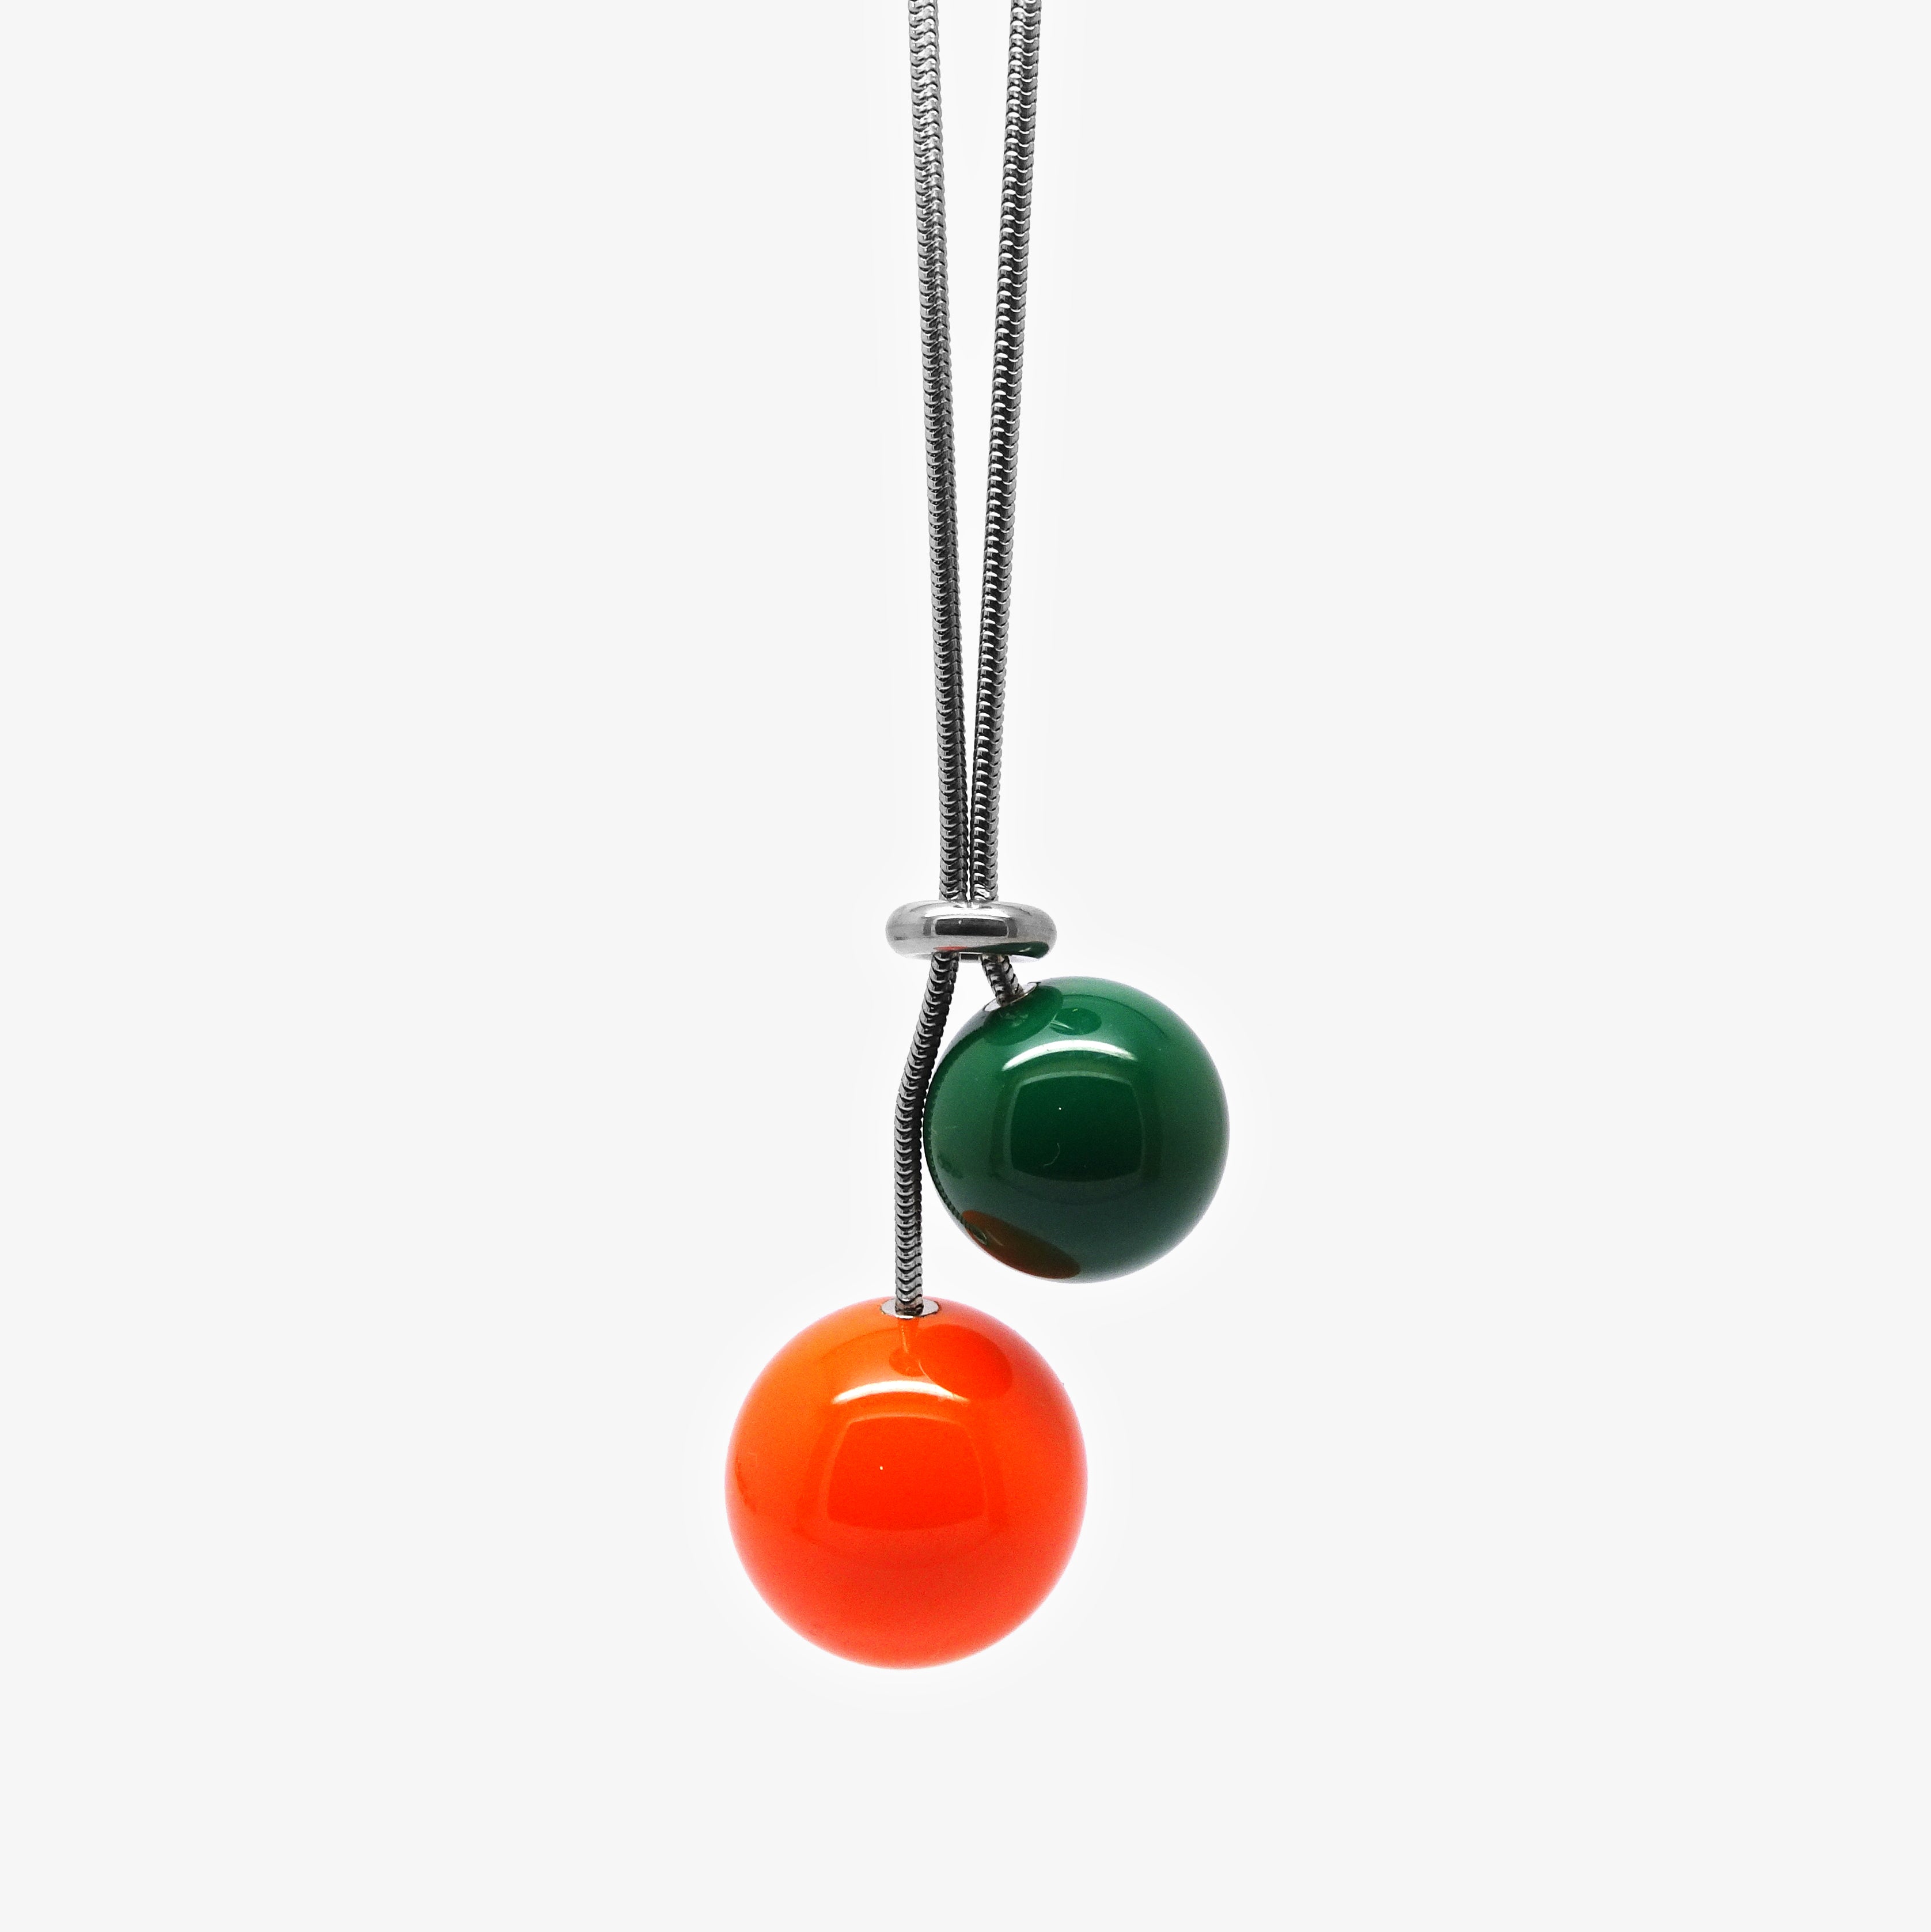 DOUBLE BALL NECKLACE - ORANGE & GREEN